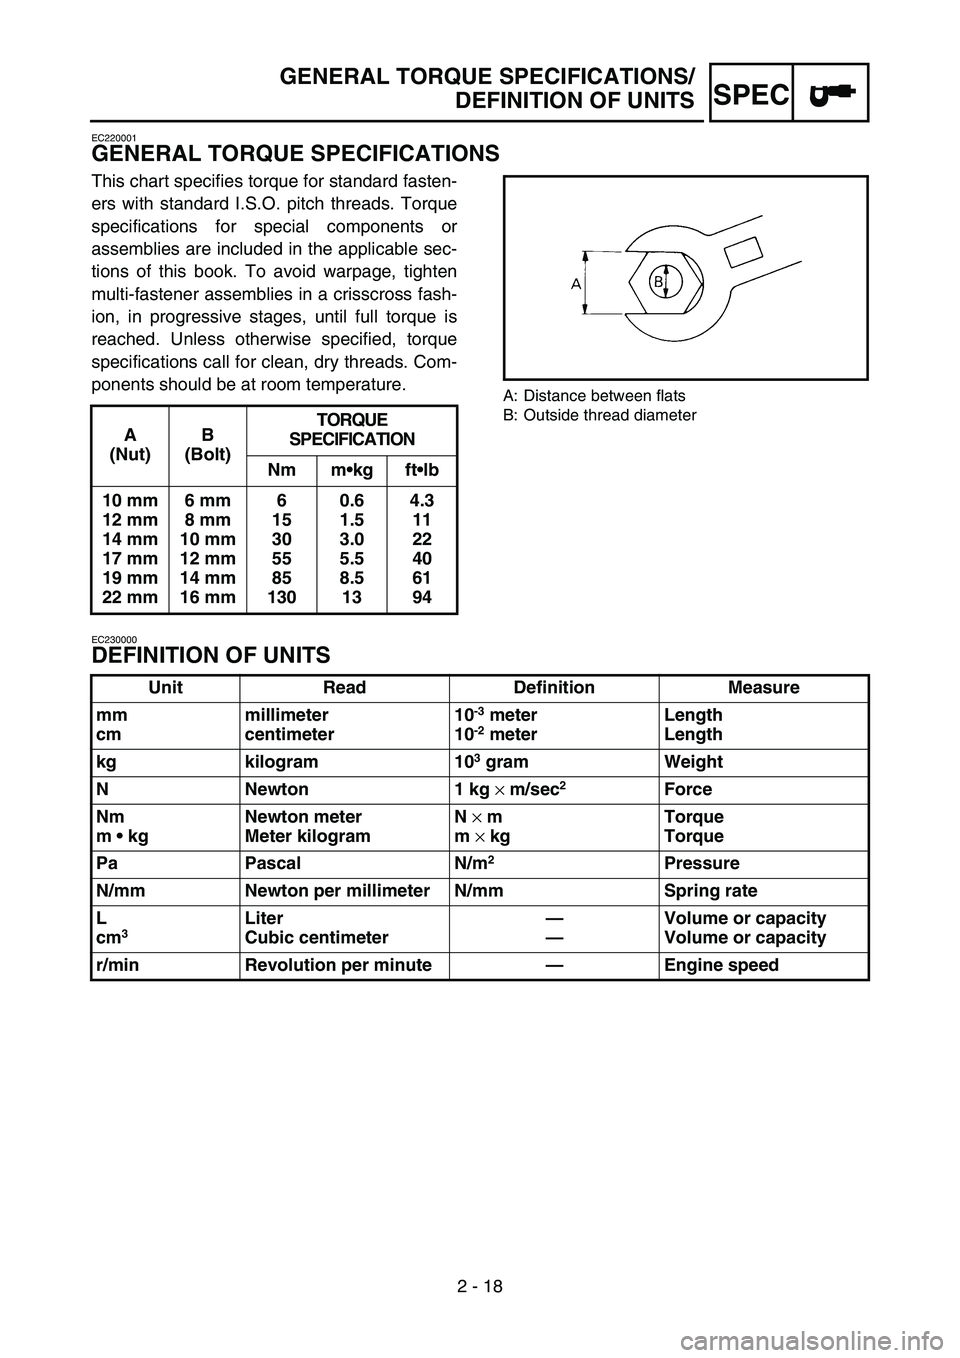 YAMAHA YZ450F 2005  Betriebsanleitungen (in German) SPEC
2 - 18
EC220001
GENERAL TORQUE SPECIFICATIONS
This chart specifies torque for standard fasten-
ers with standard I.S.O. pitch threads. Torque
specifications for special components or
assemblies a